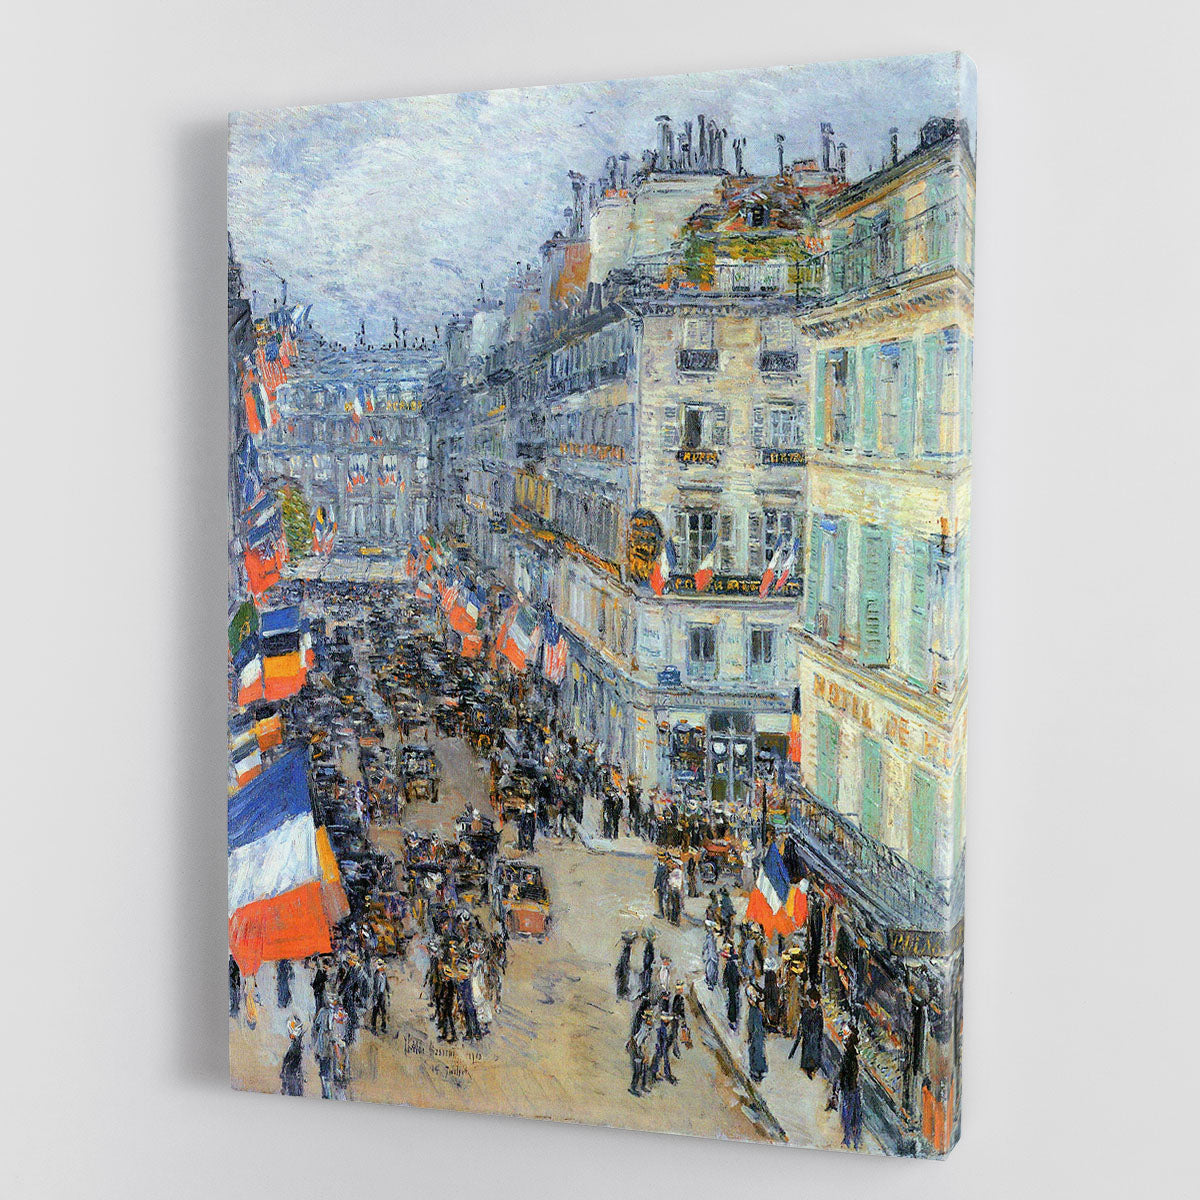 The 14th July Rue Daunou by Hassam Canvas Print or Poster - Canvas Art Rocks - 1